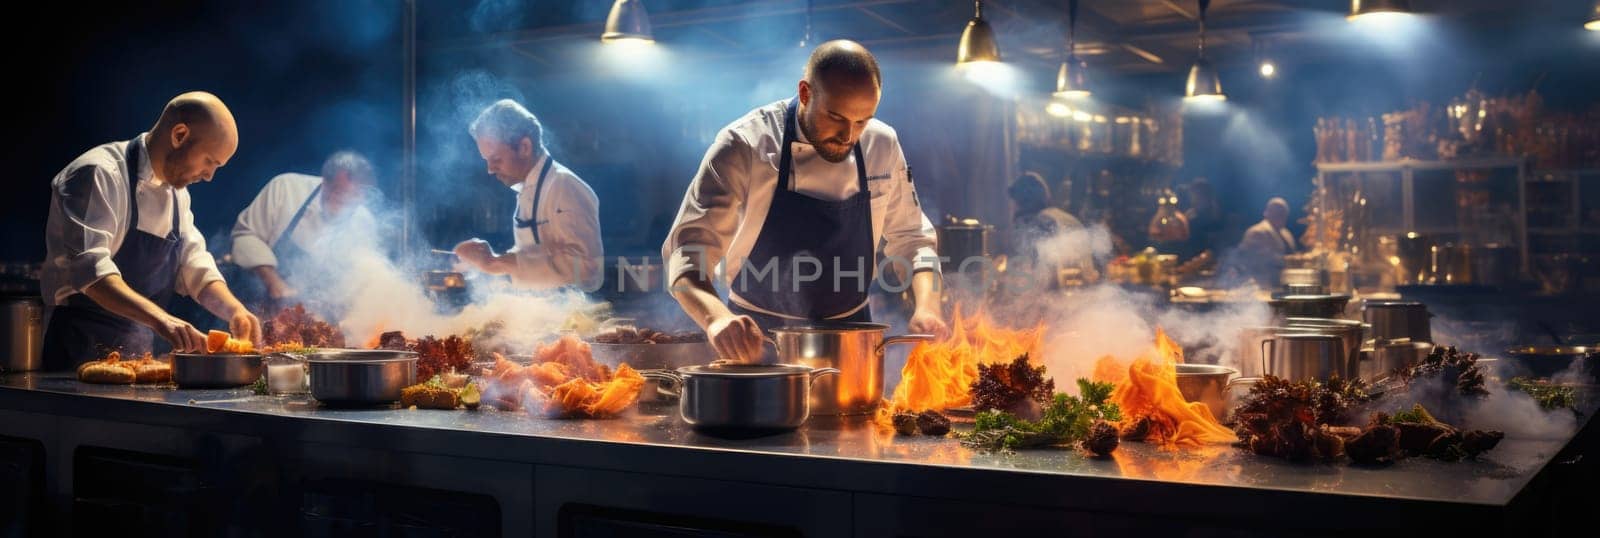 Group of People Cooking Together in Kitchen by but_photo